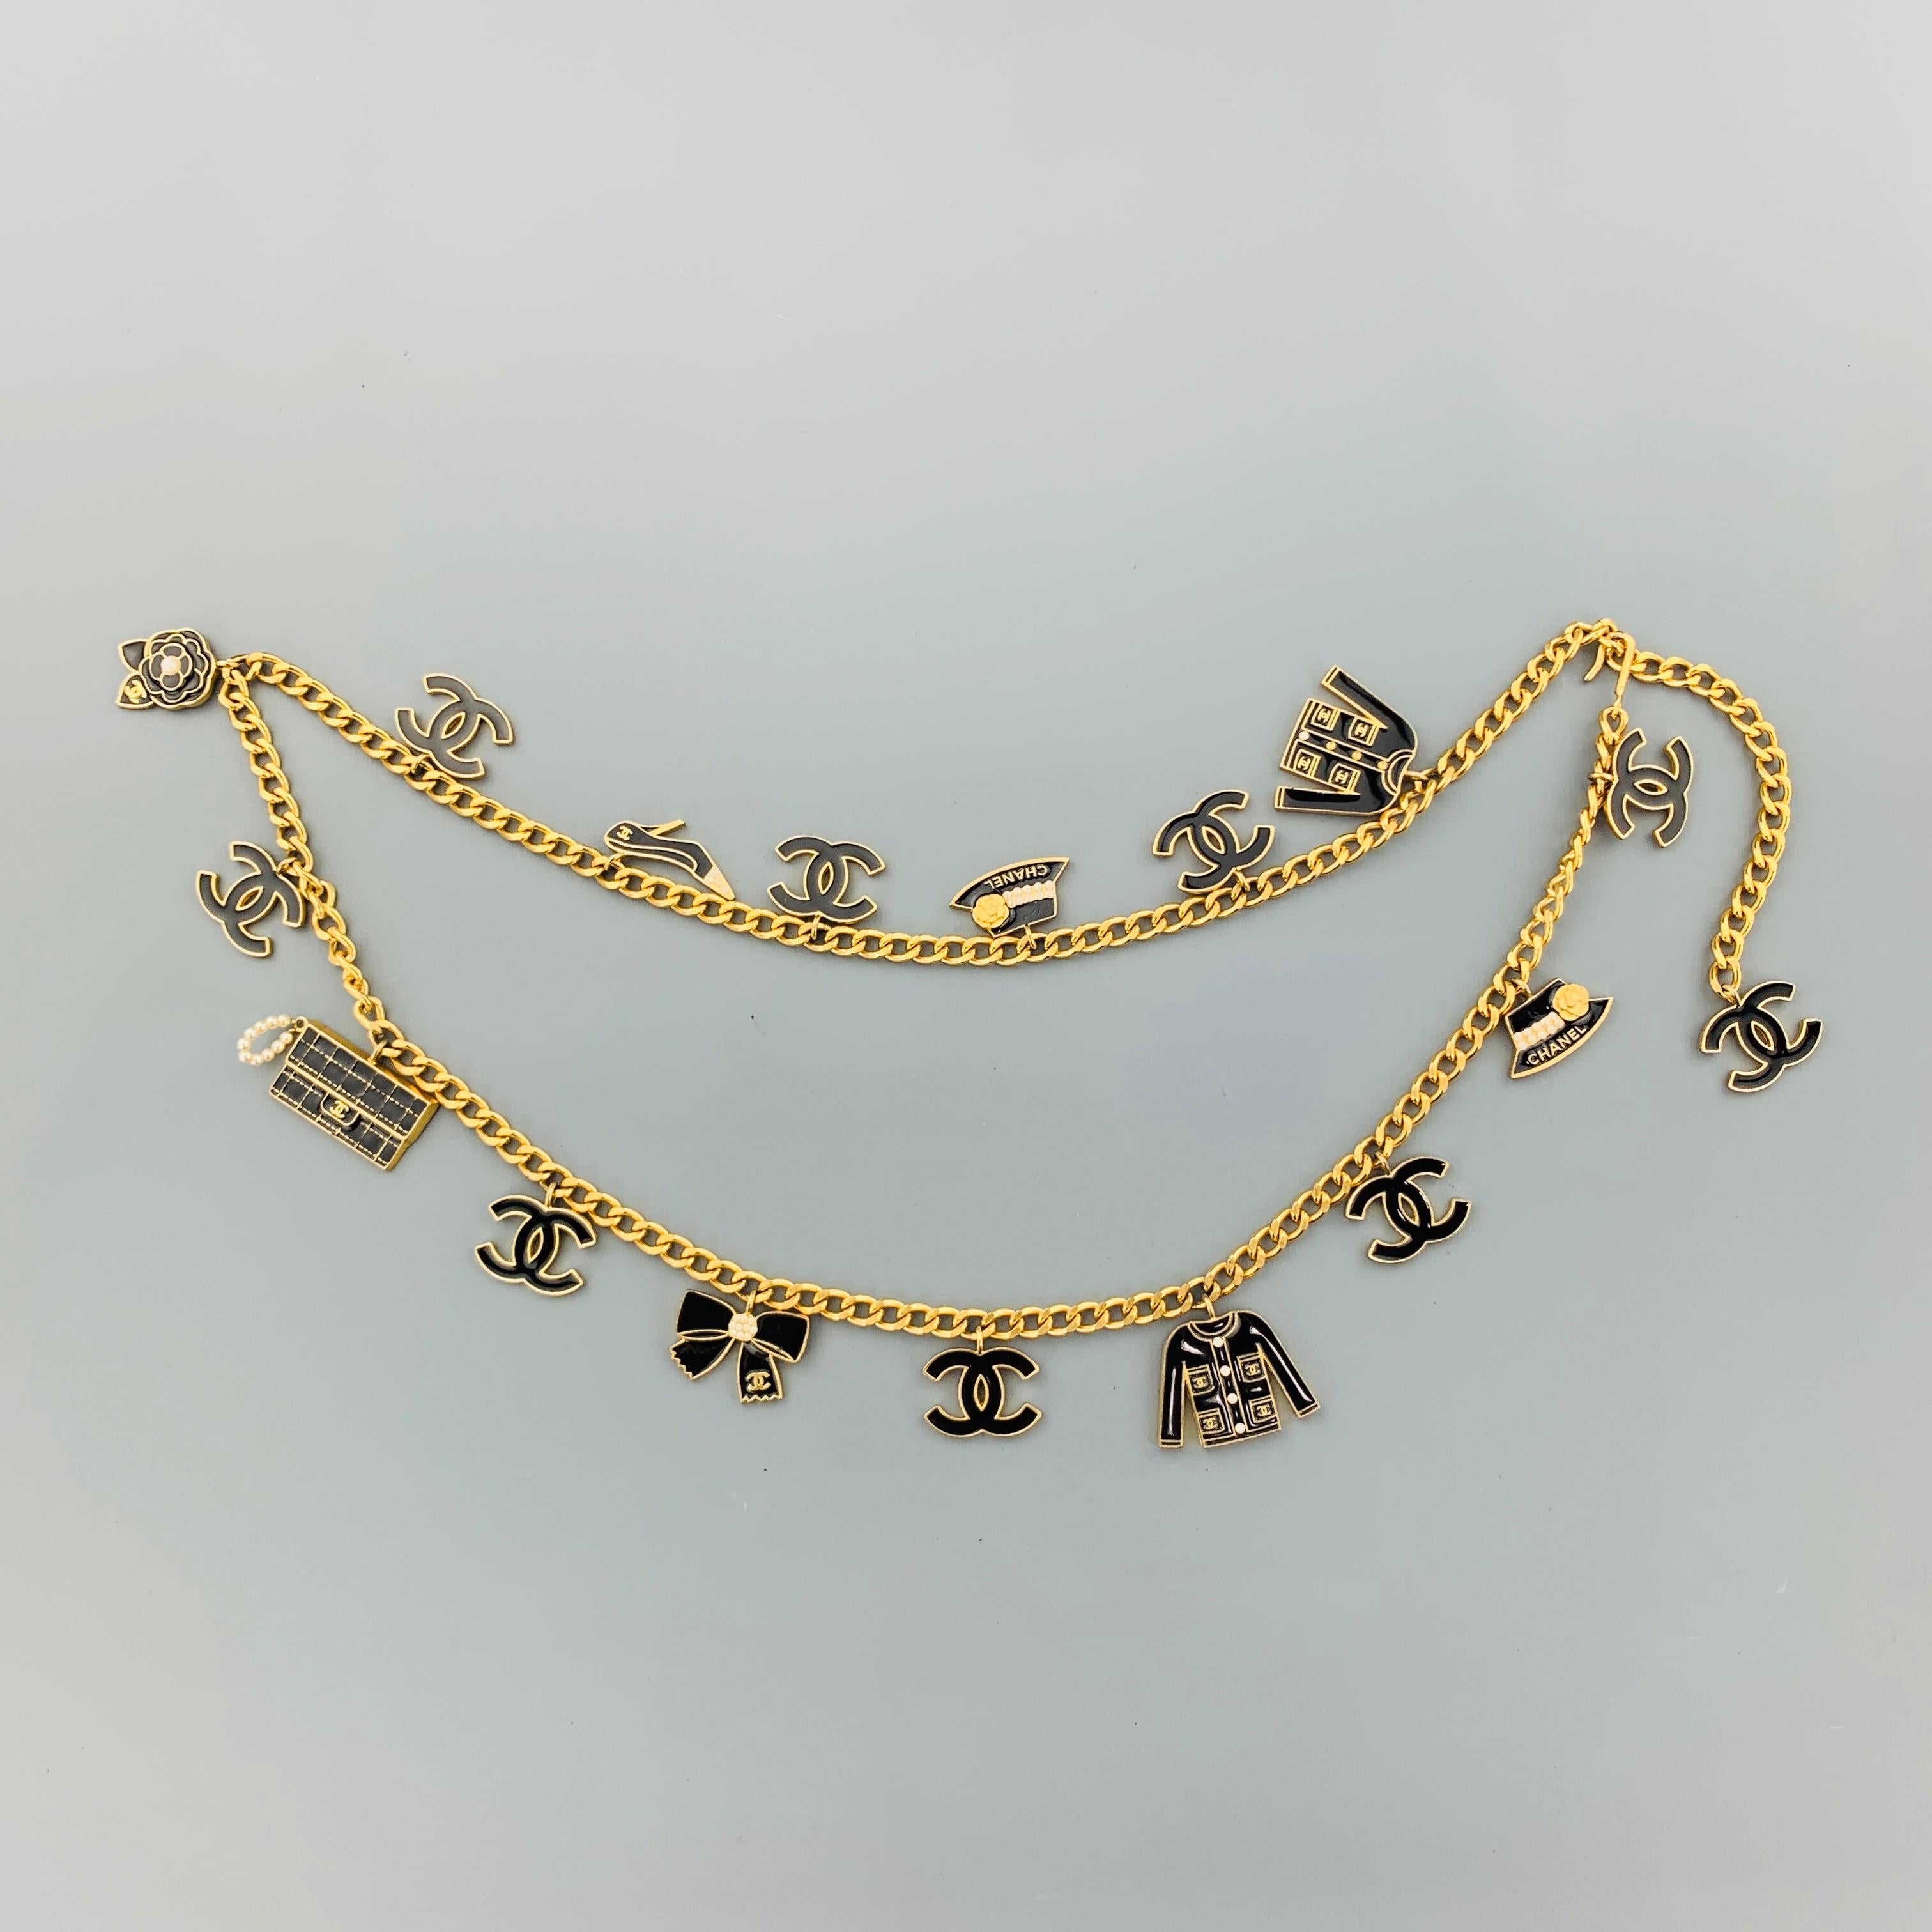 CHANEL Fall Winter 2002 Collection belt comes in bold yellow gold tone metal and features a chain belt strap adorned with black enamel, faux pearl embellished Coco Chanel charms in jacket, CC logo,  hat, pump, camellia, purse, and bow motifs. Wear